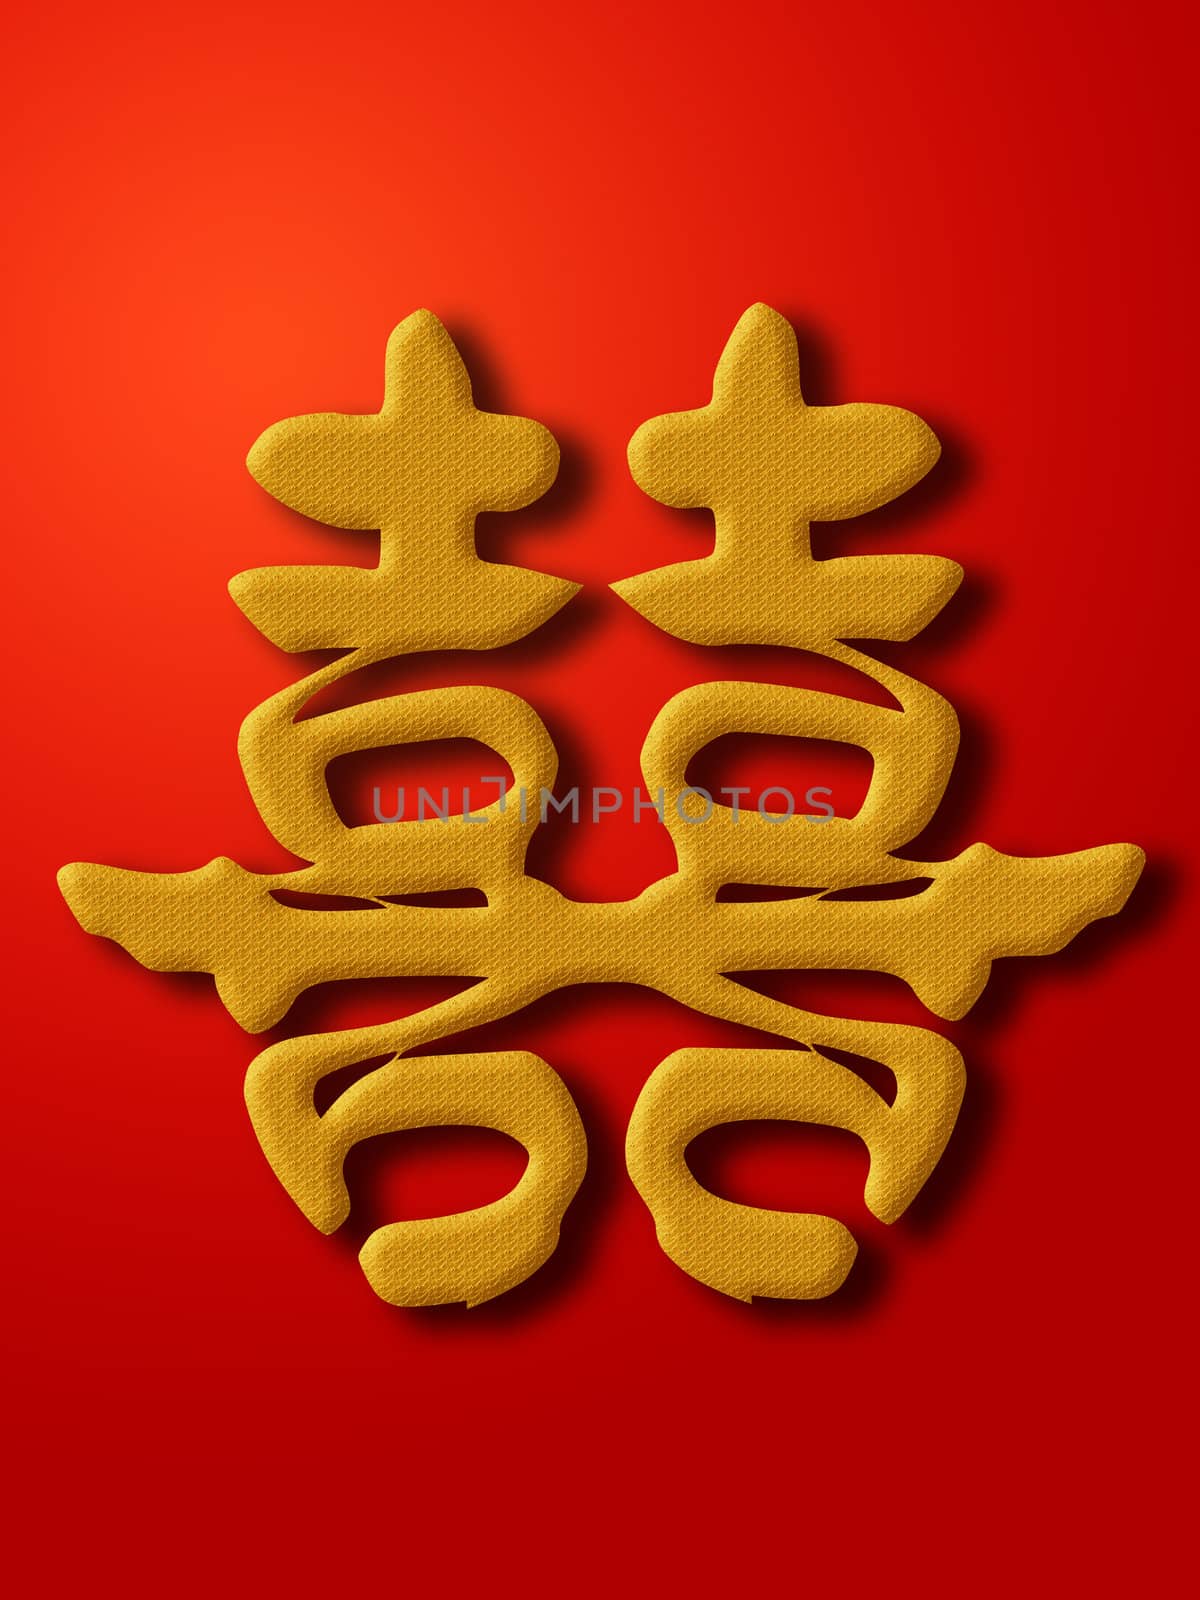 Double Happiness Chinese Calligraphy Gold on Red by Davidgn